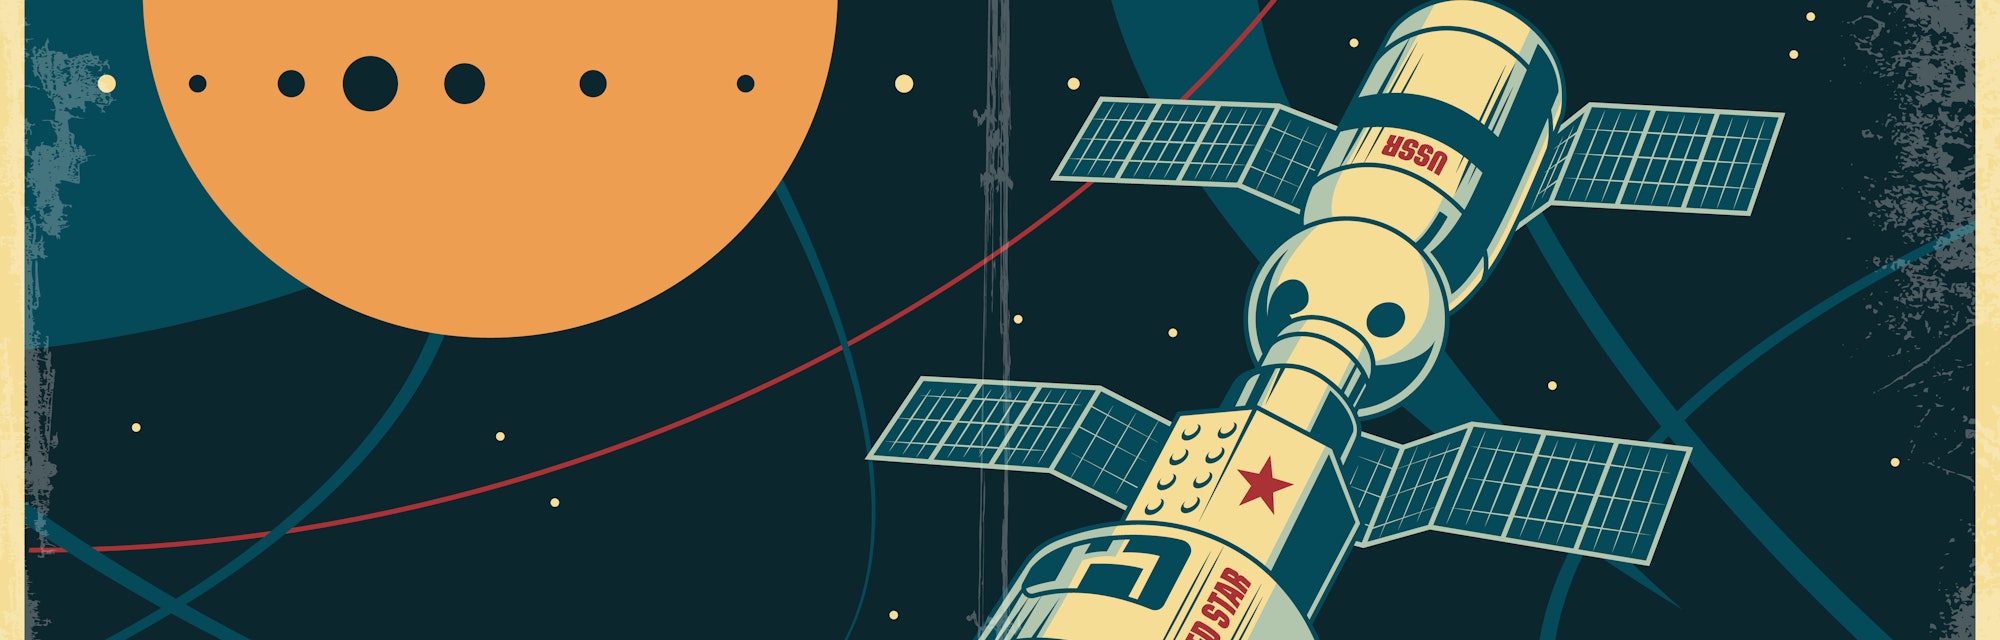 Retro Soviet Space Propaganda Placard Style Illustration, Space Station, Outer Space Background